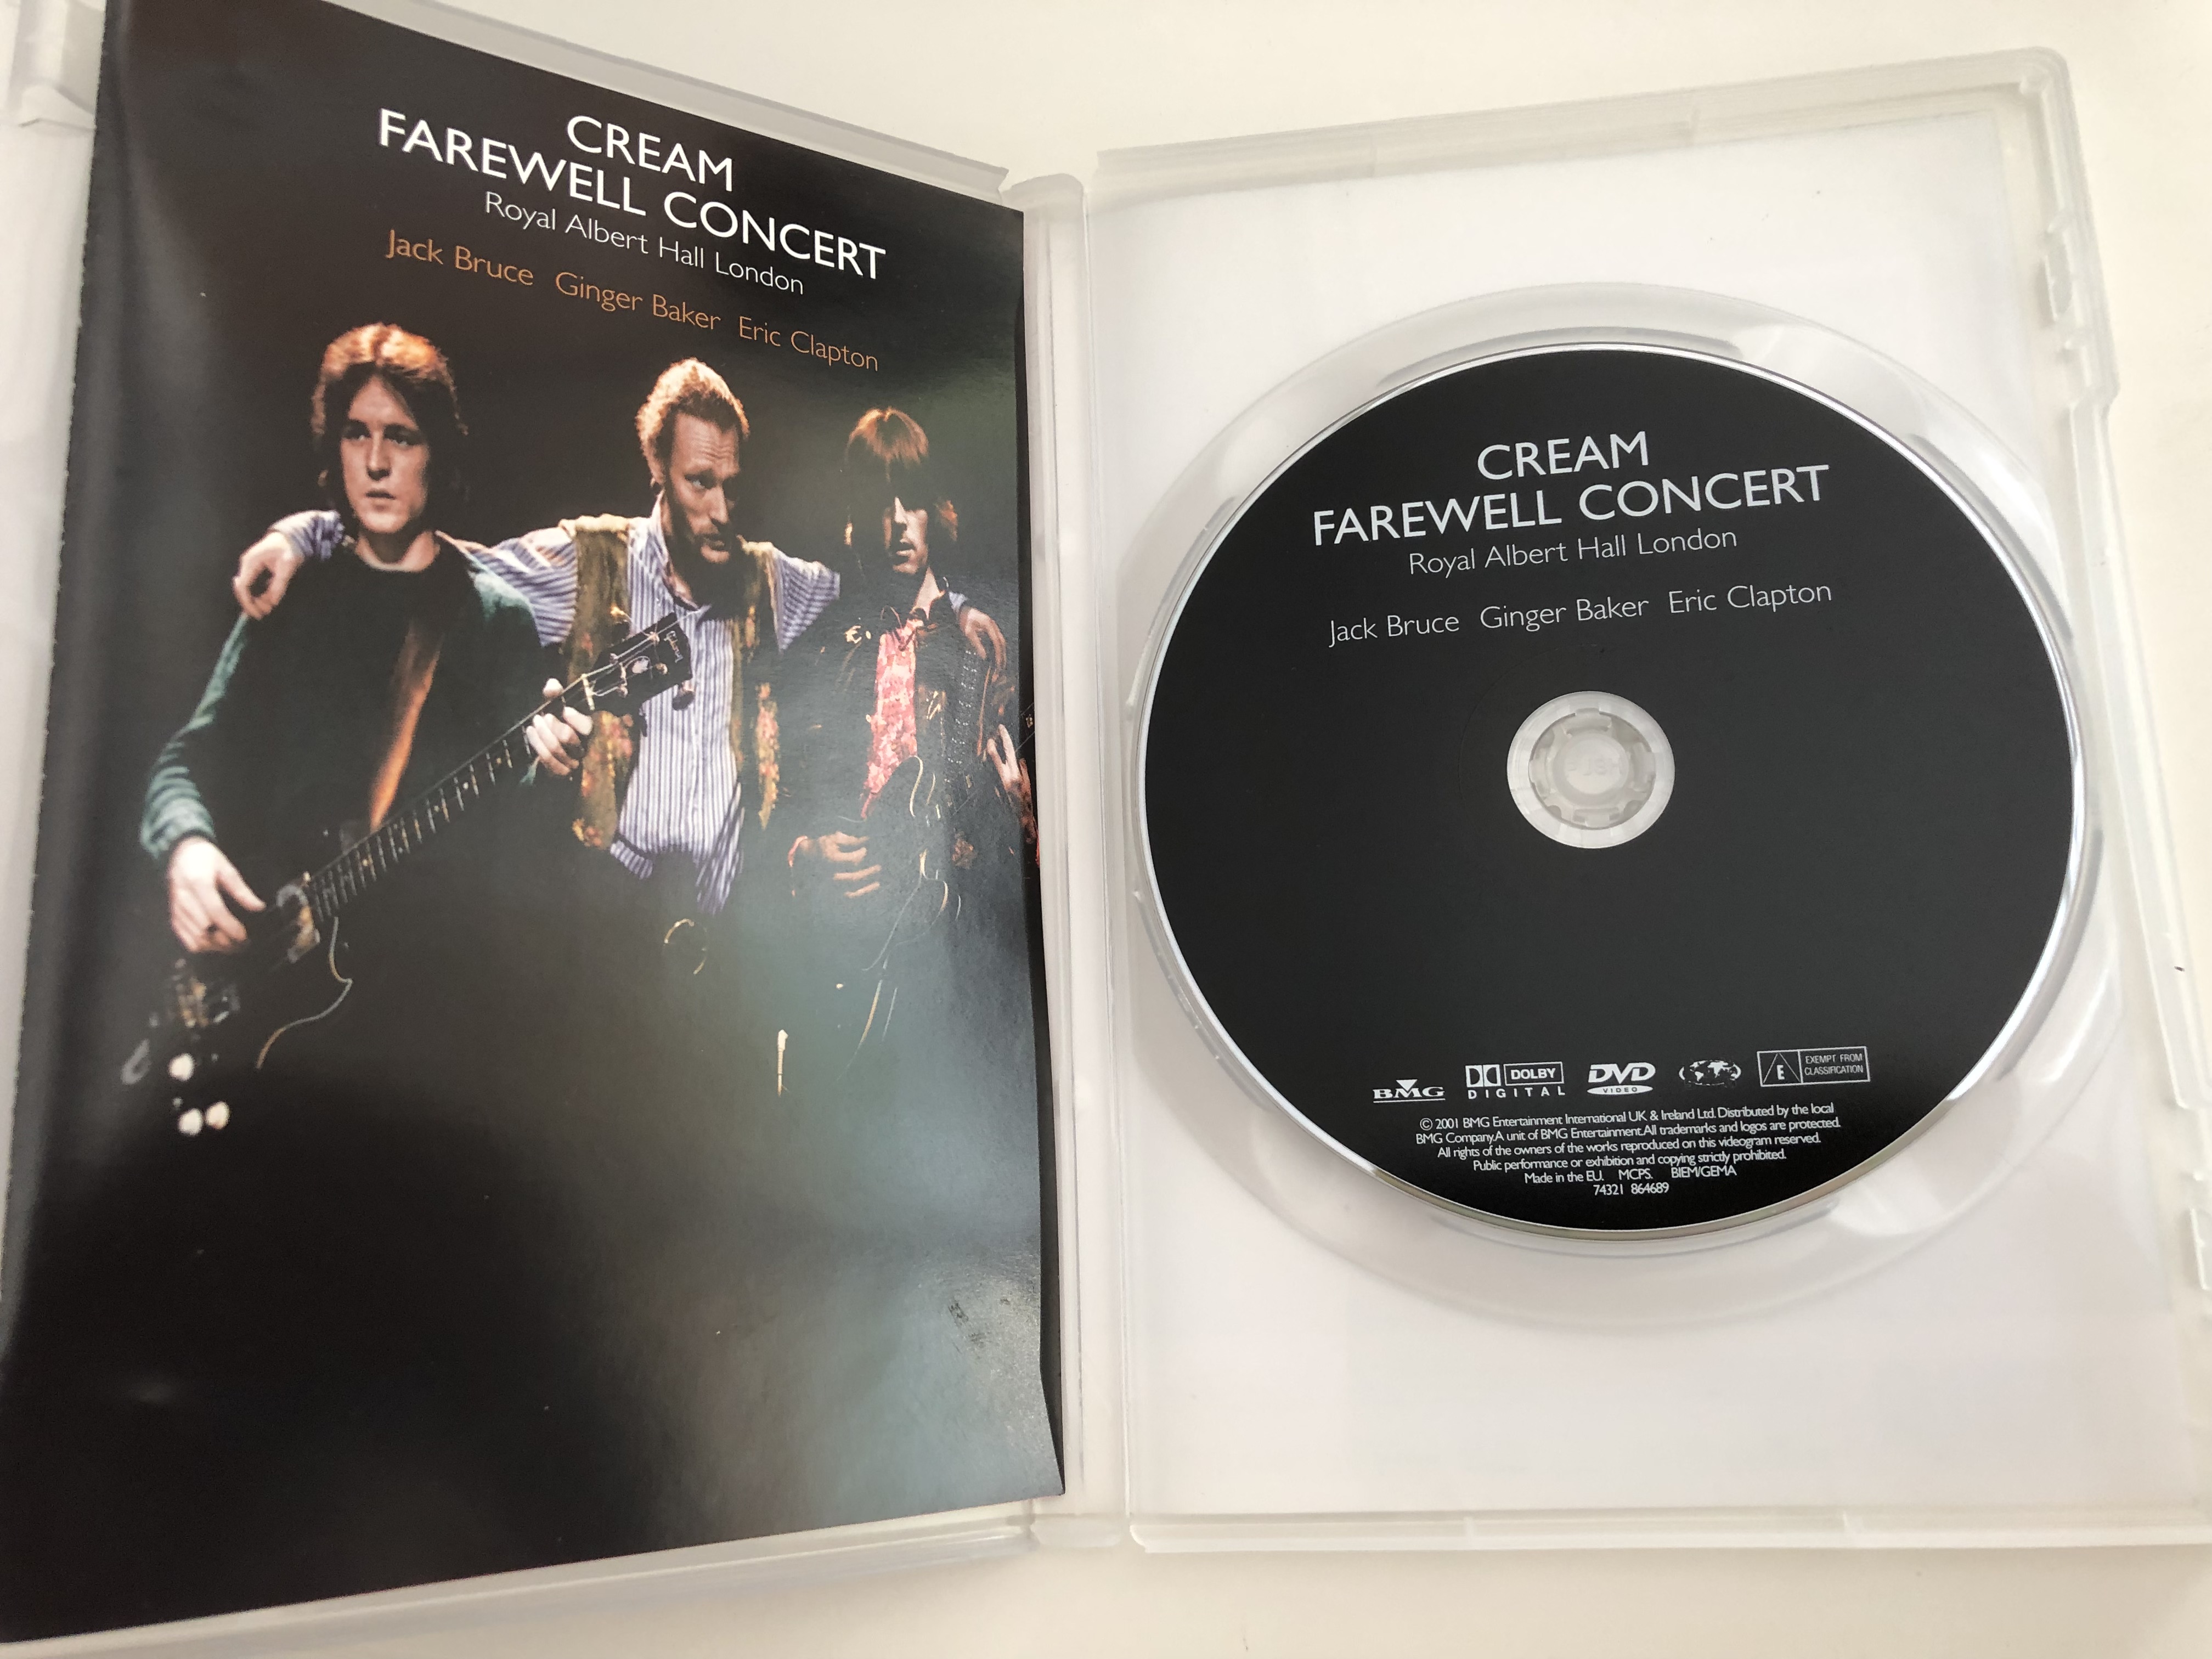 cream-farewell-concert-dvd-2001-royal-albert-hall-london-jack-bruce-ginger-baker-eric-clapton-includes-both-80-and-45-minute-versions-sony-bmg-2-.jpg